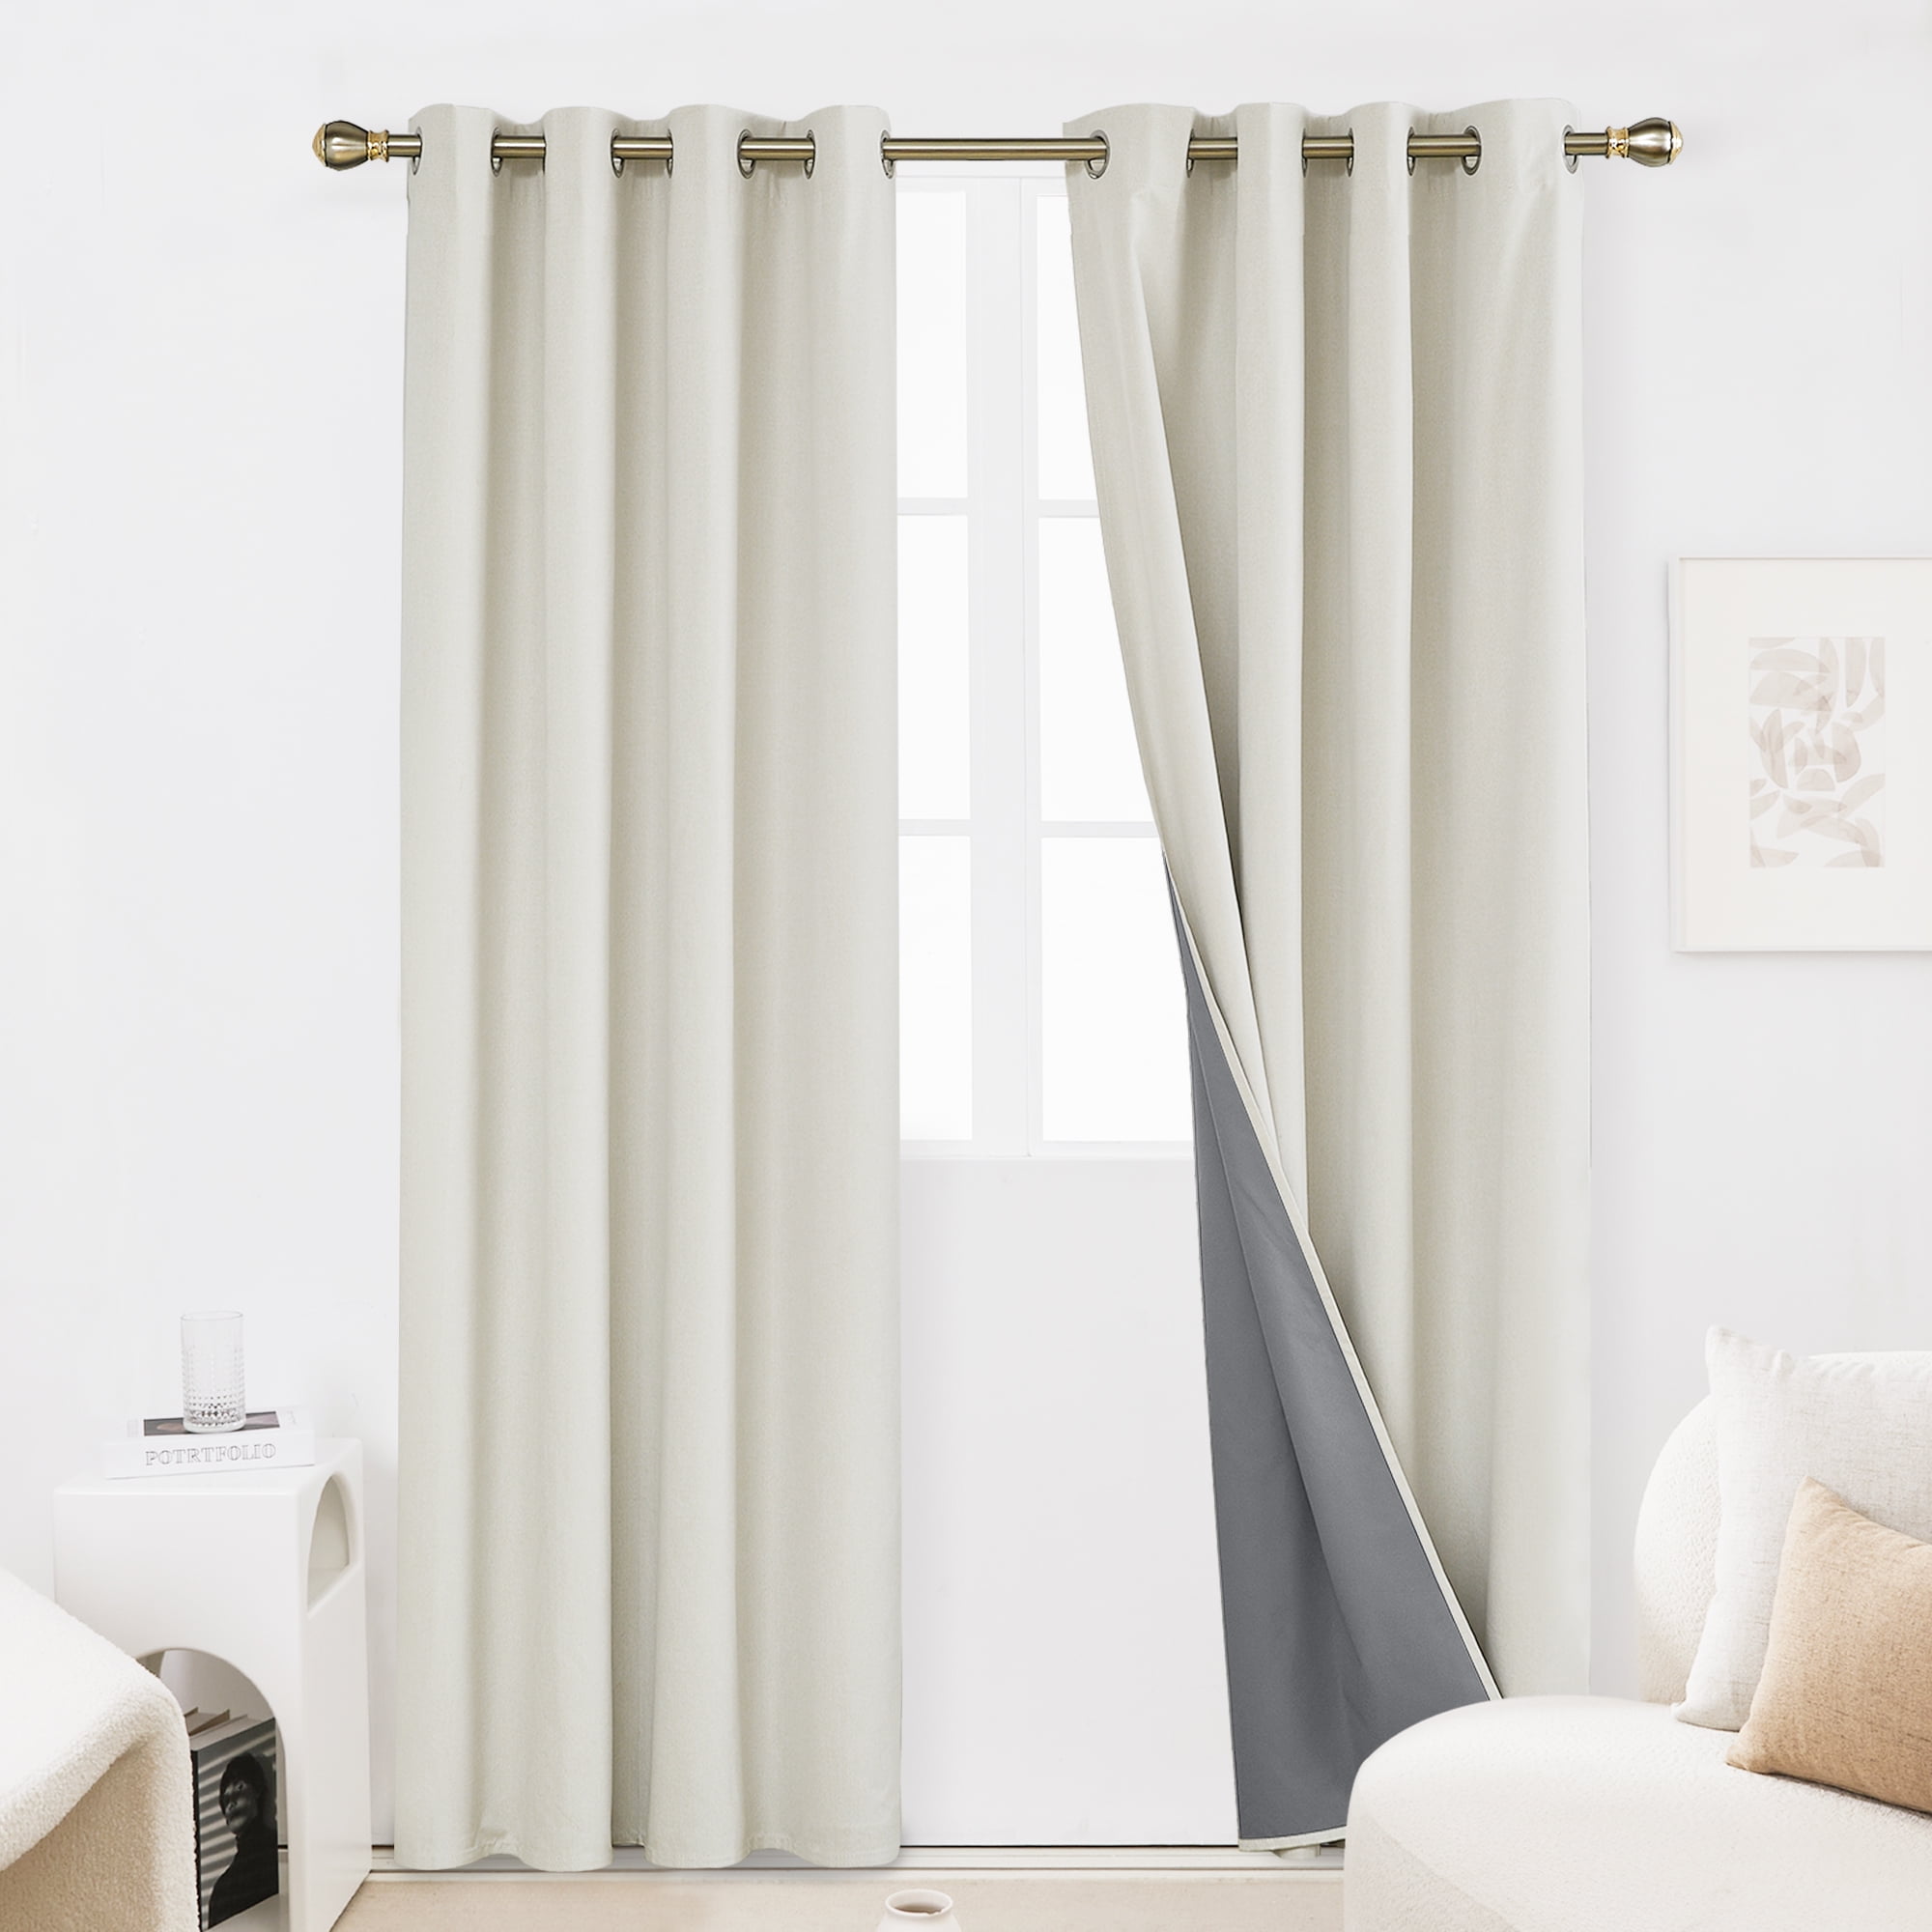 Deconovo 100% Total Blackout Curtains 108 inch Long, 2 Panels Faux Linen  Window Drapes, Thermal Insulated Grommet Curtains, Soundproof Window Curtain  for Bedroom(Cream, 52 x 108 inch, 2 Panels) - Walmart.com